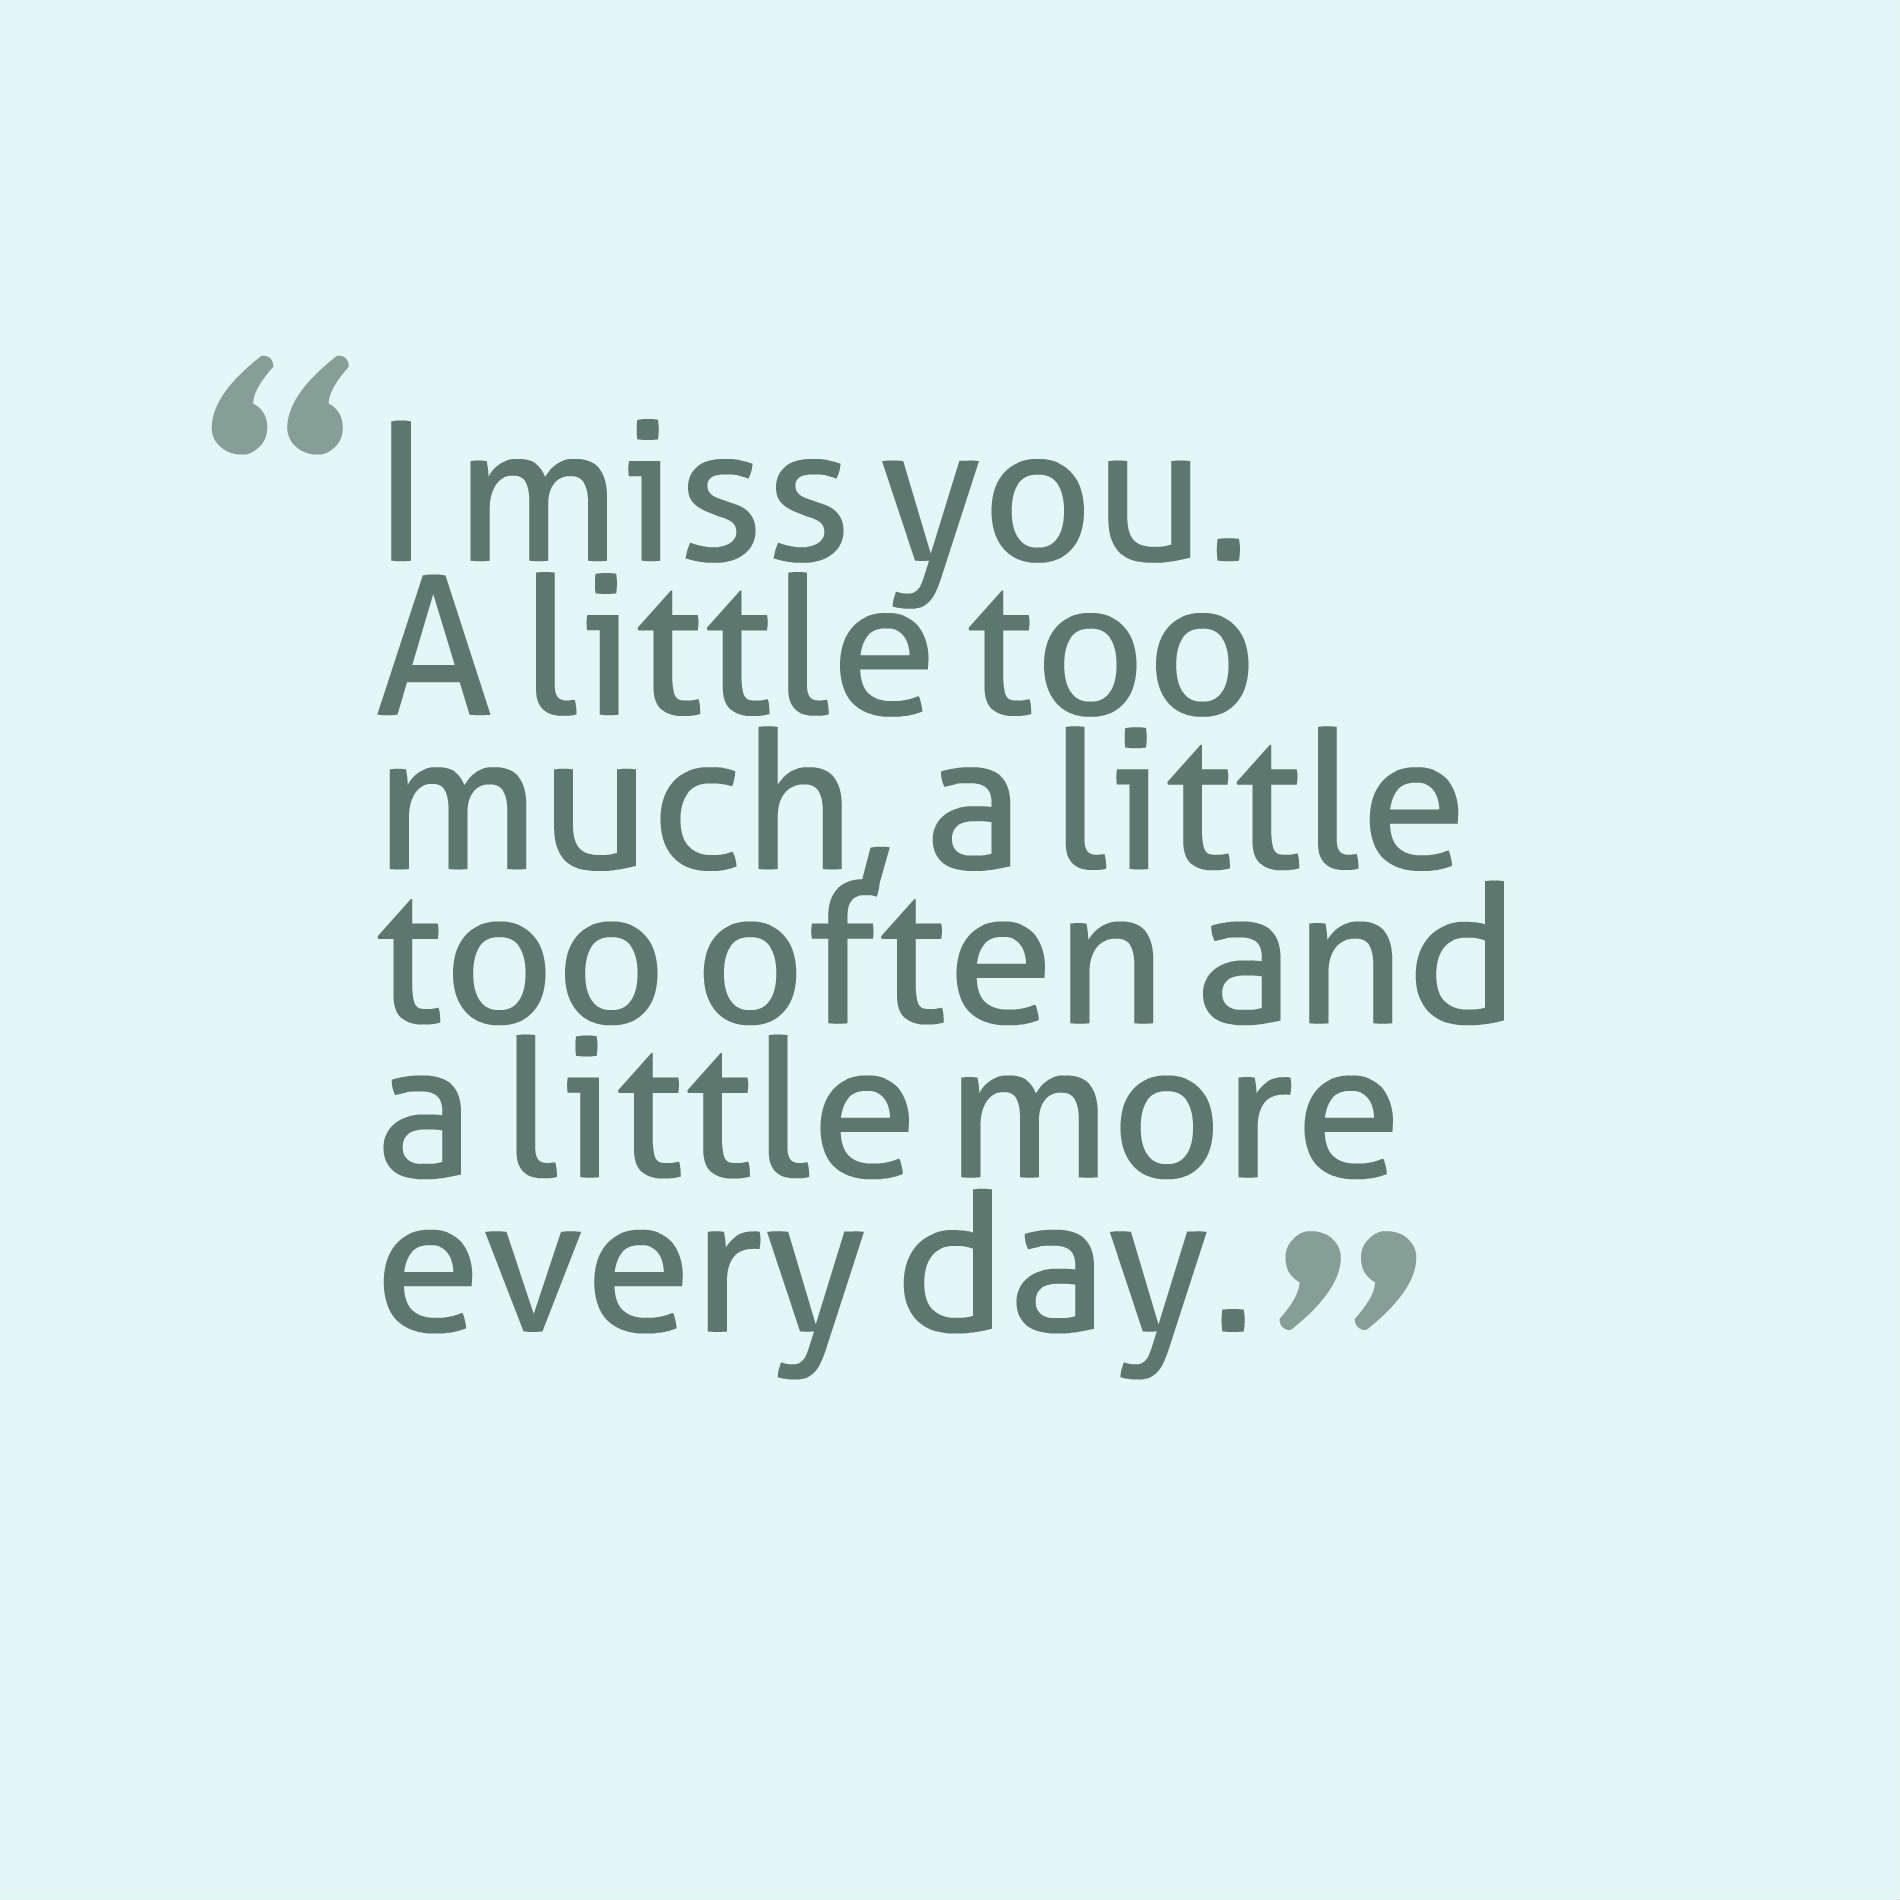 I miss you. A little too much, a little too often and a little more every day.